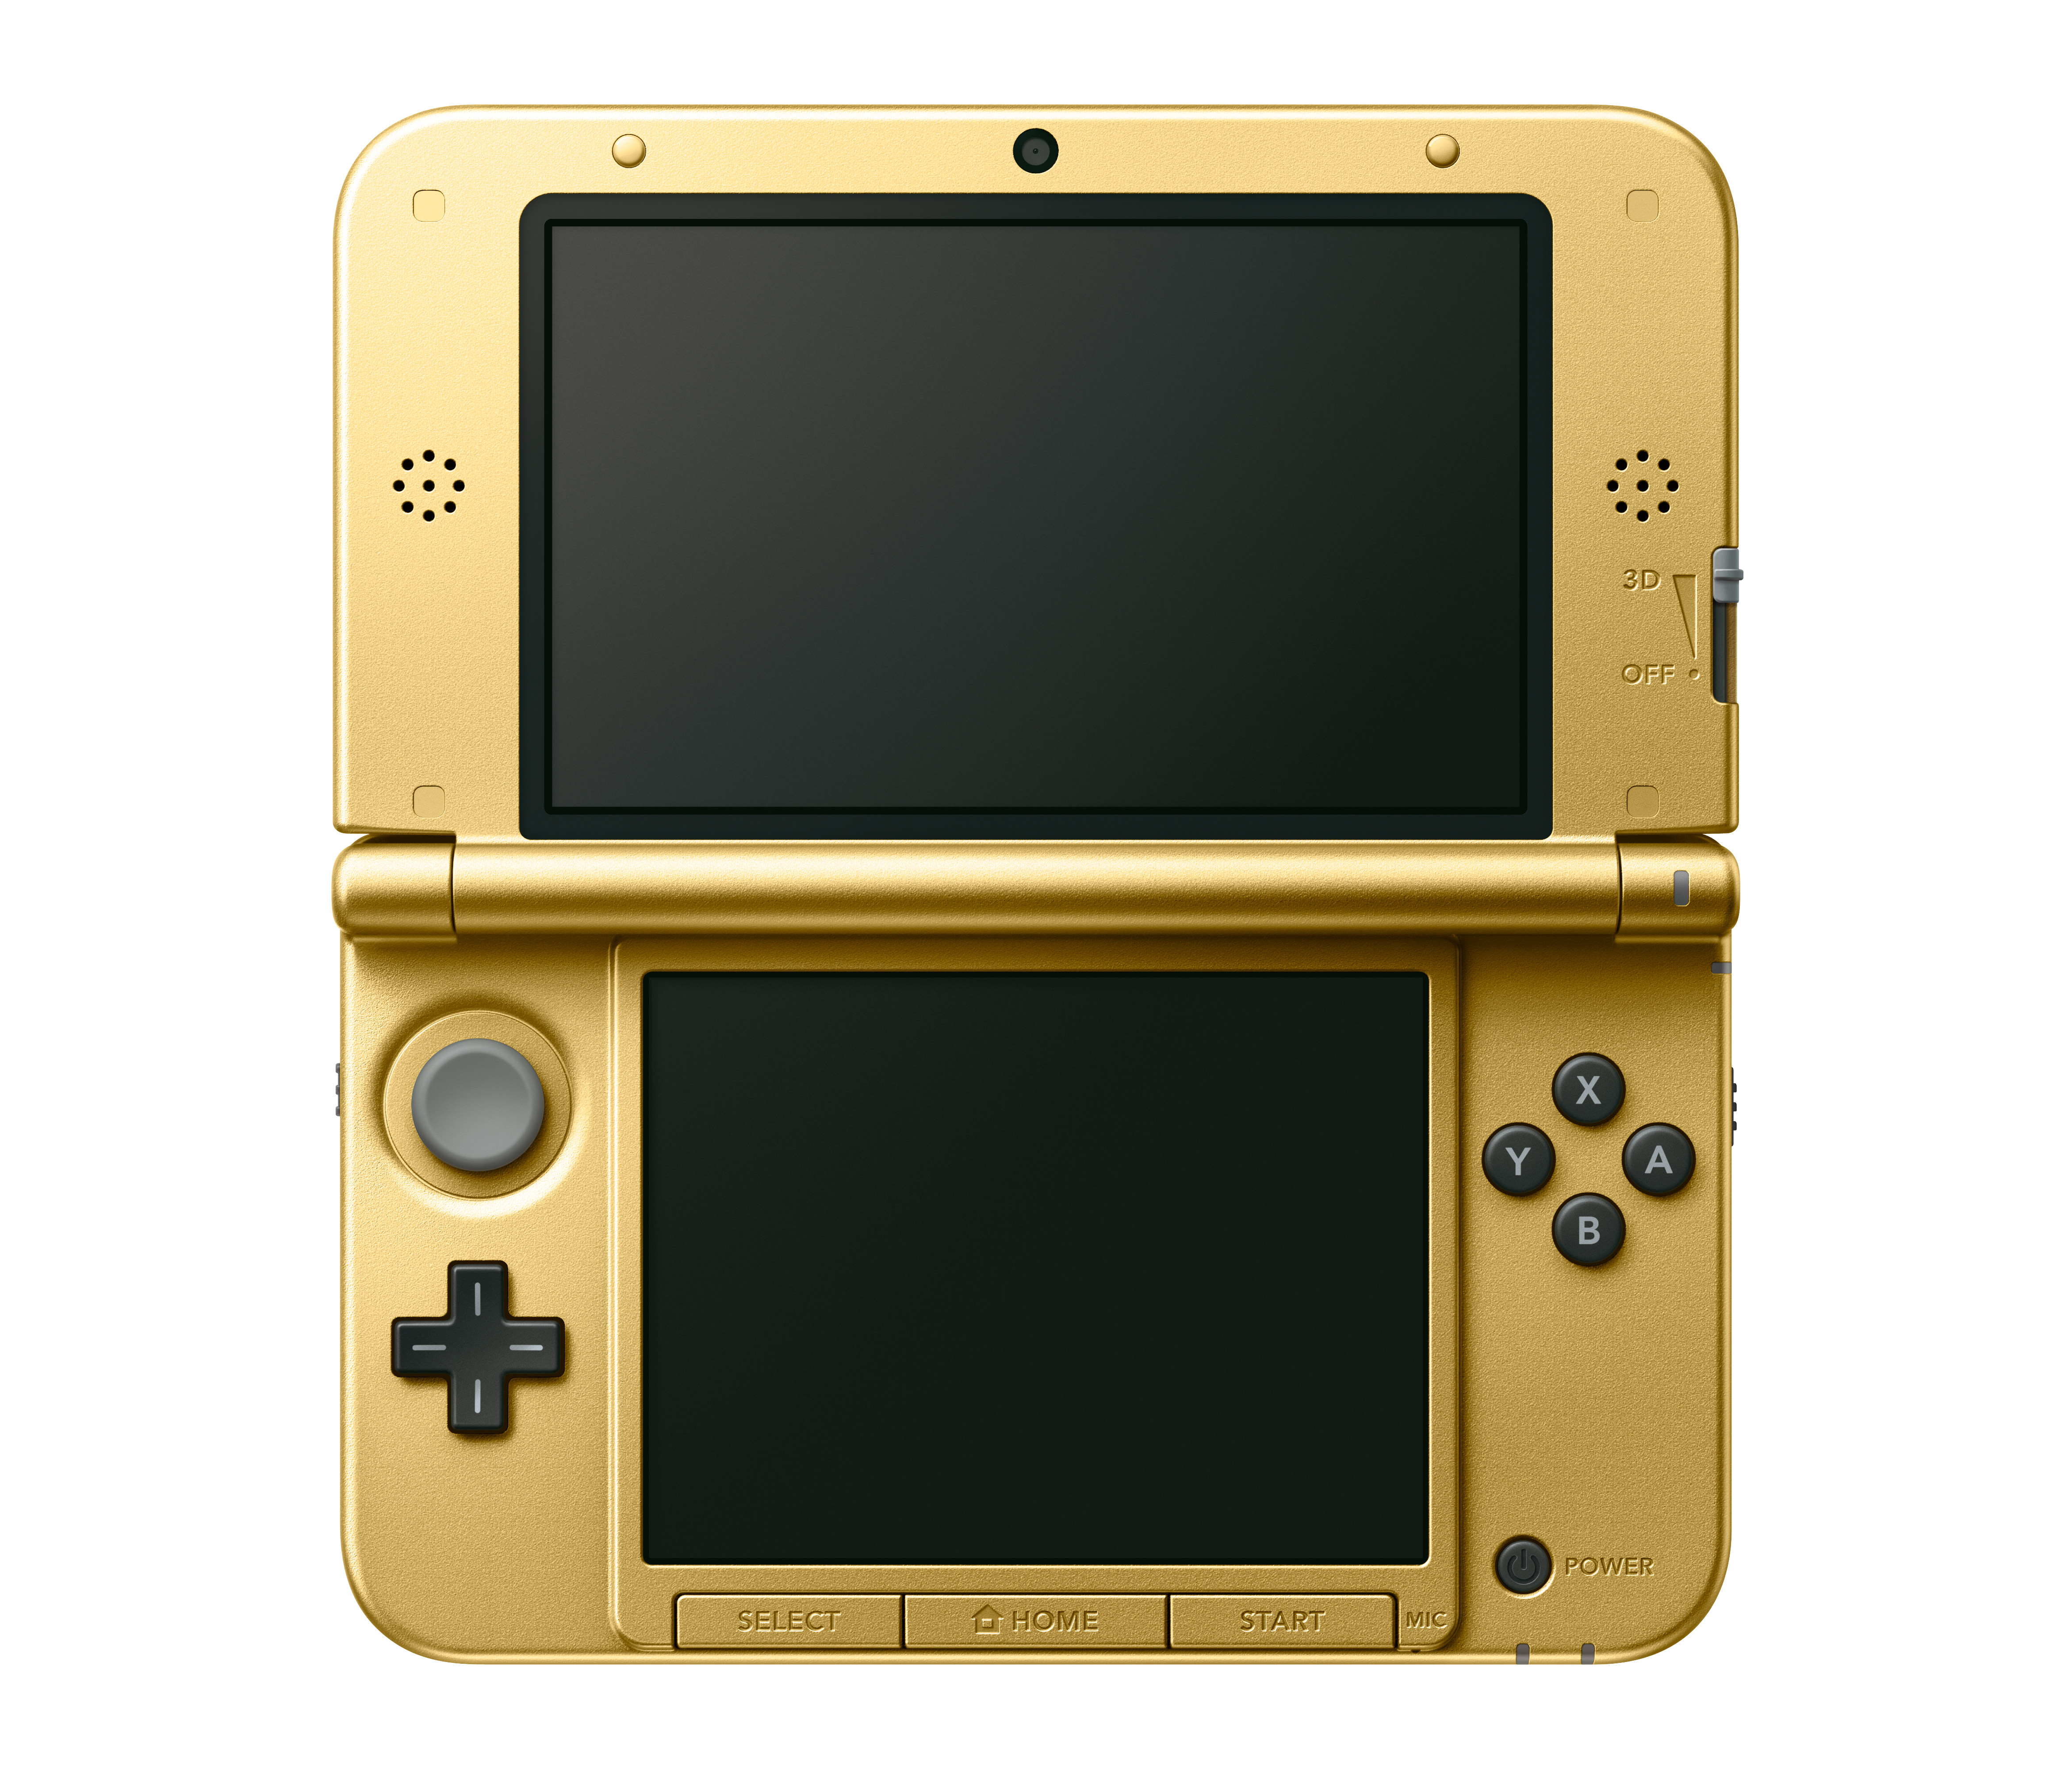 NoA PR: New Gold-and-Black Nintendo 3DS XL Comes with The Legend of Zelda: A Link Between Worlds